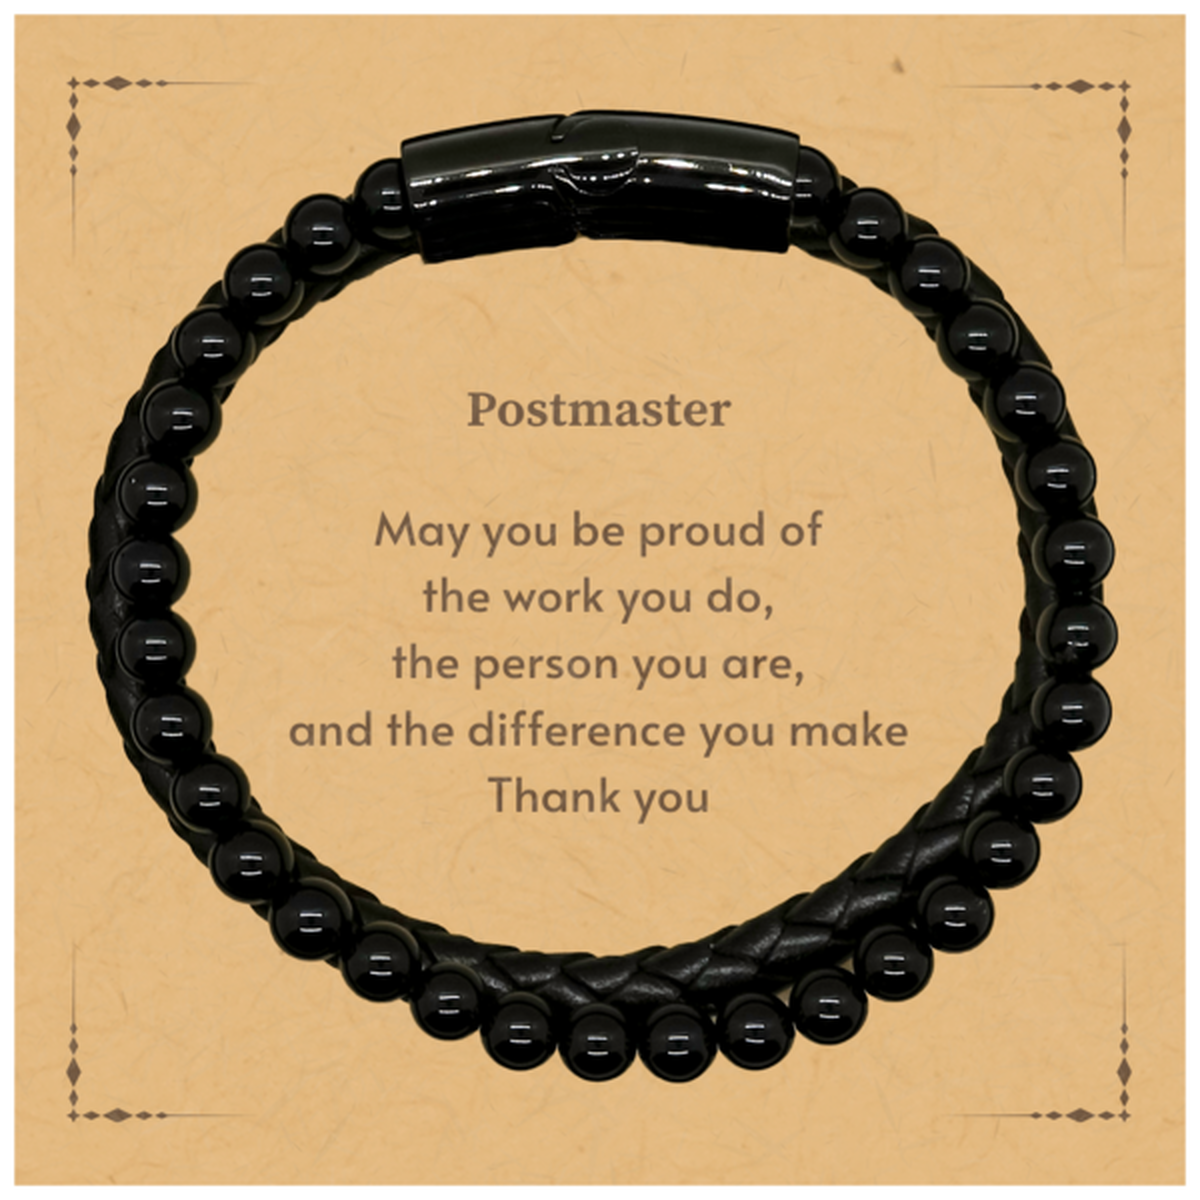 Heartwarming Stone Leather Bracelets Retirement Coworkers Gifts for Postmaster, Postmaster May You be proud of the work you do, the person you are Gifts for Boss Men Women Friends